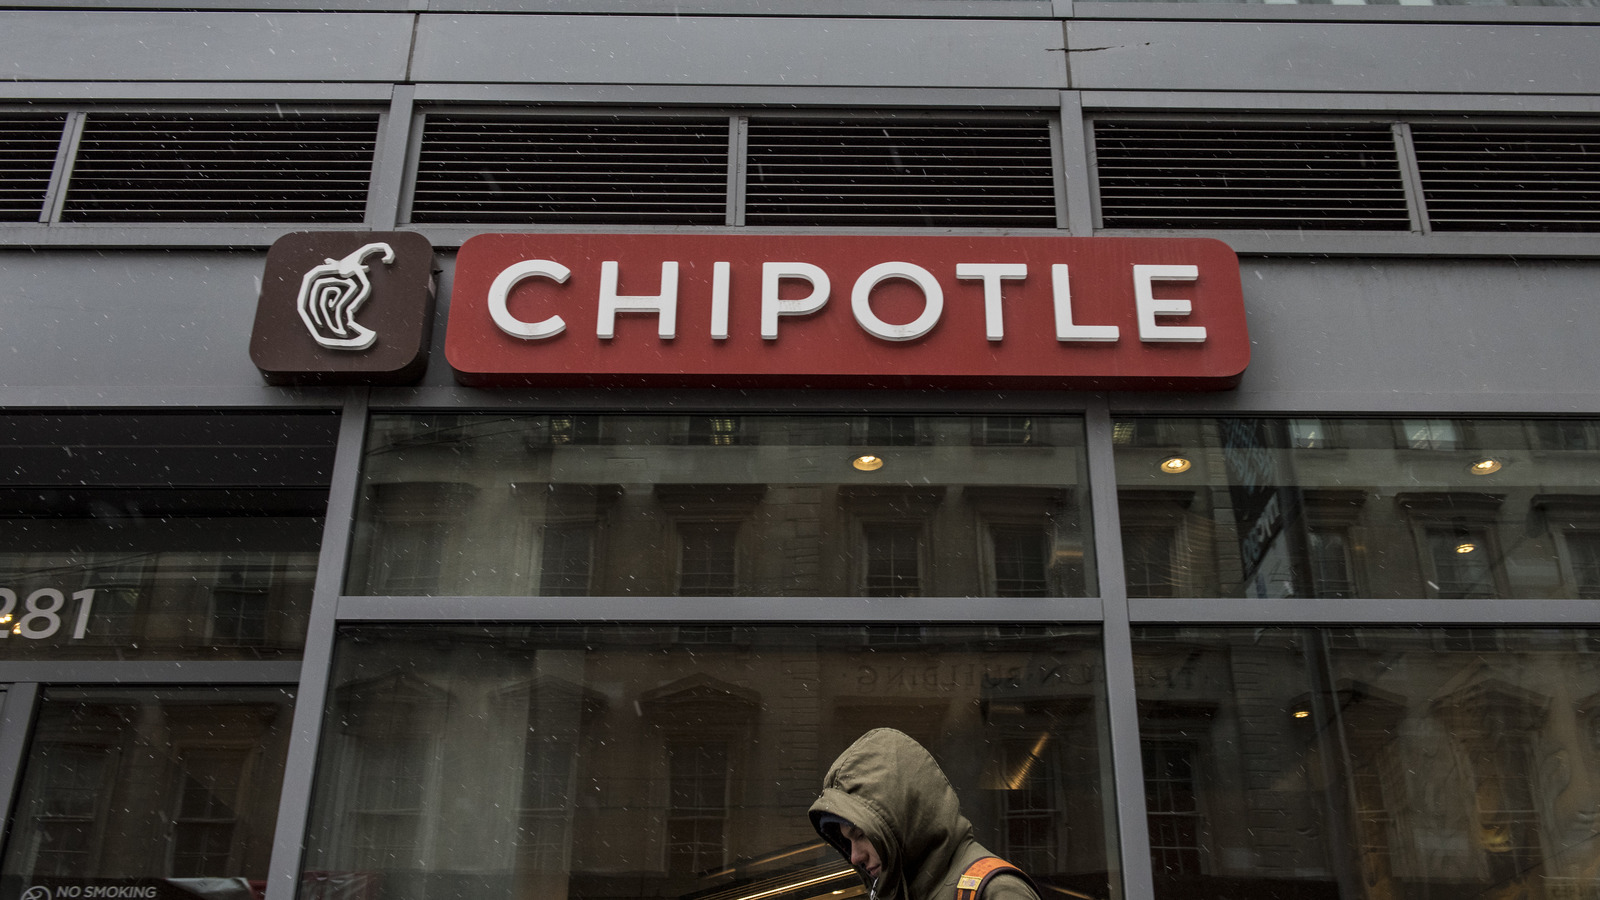 The Big Change That Will Be Coming To New Chipotle Locations